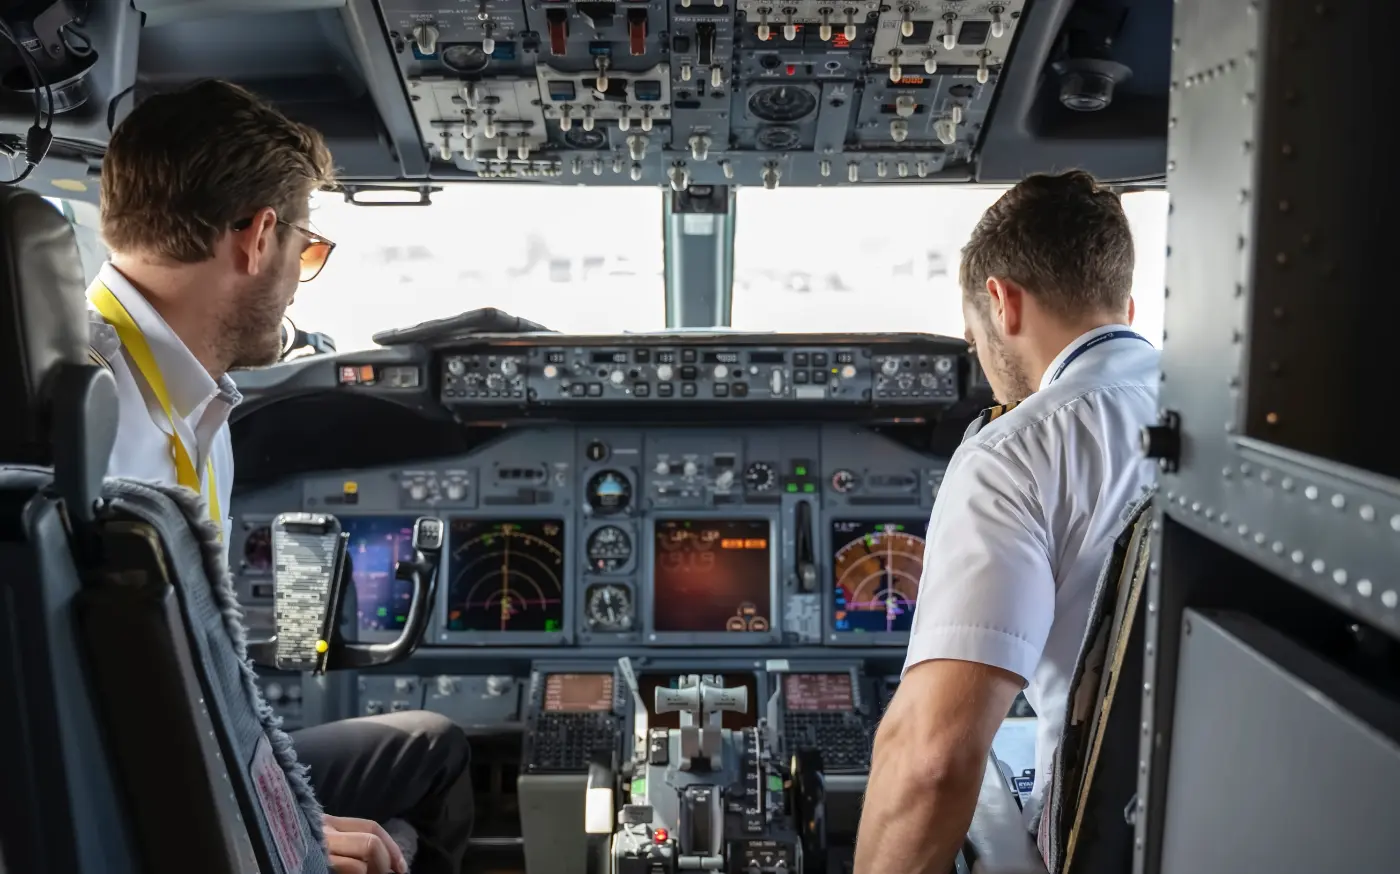 How often do pilots work? Pilots for airlines fly 75 hours each month on average.